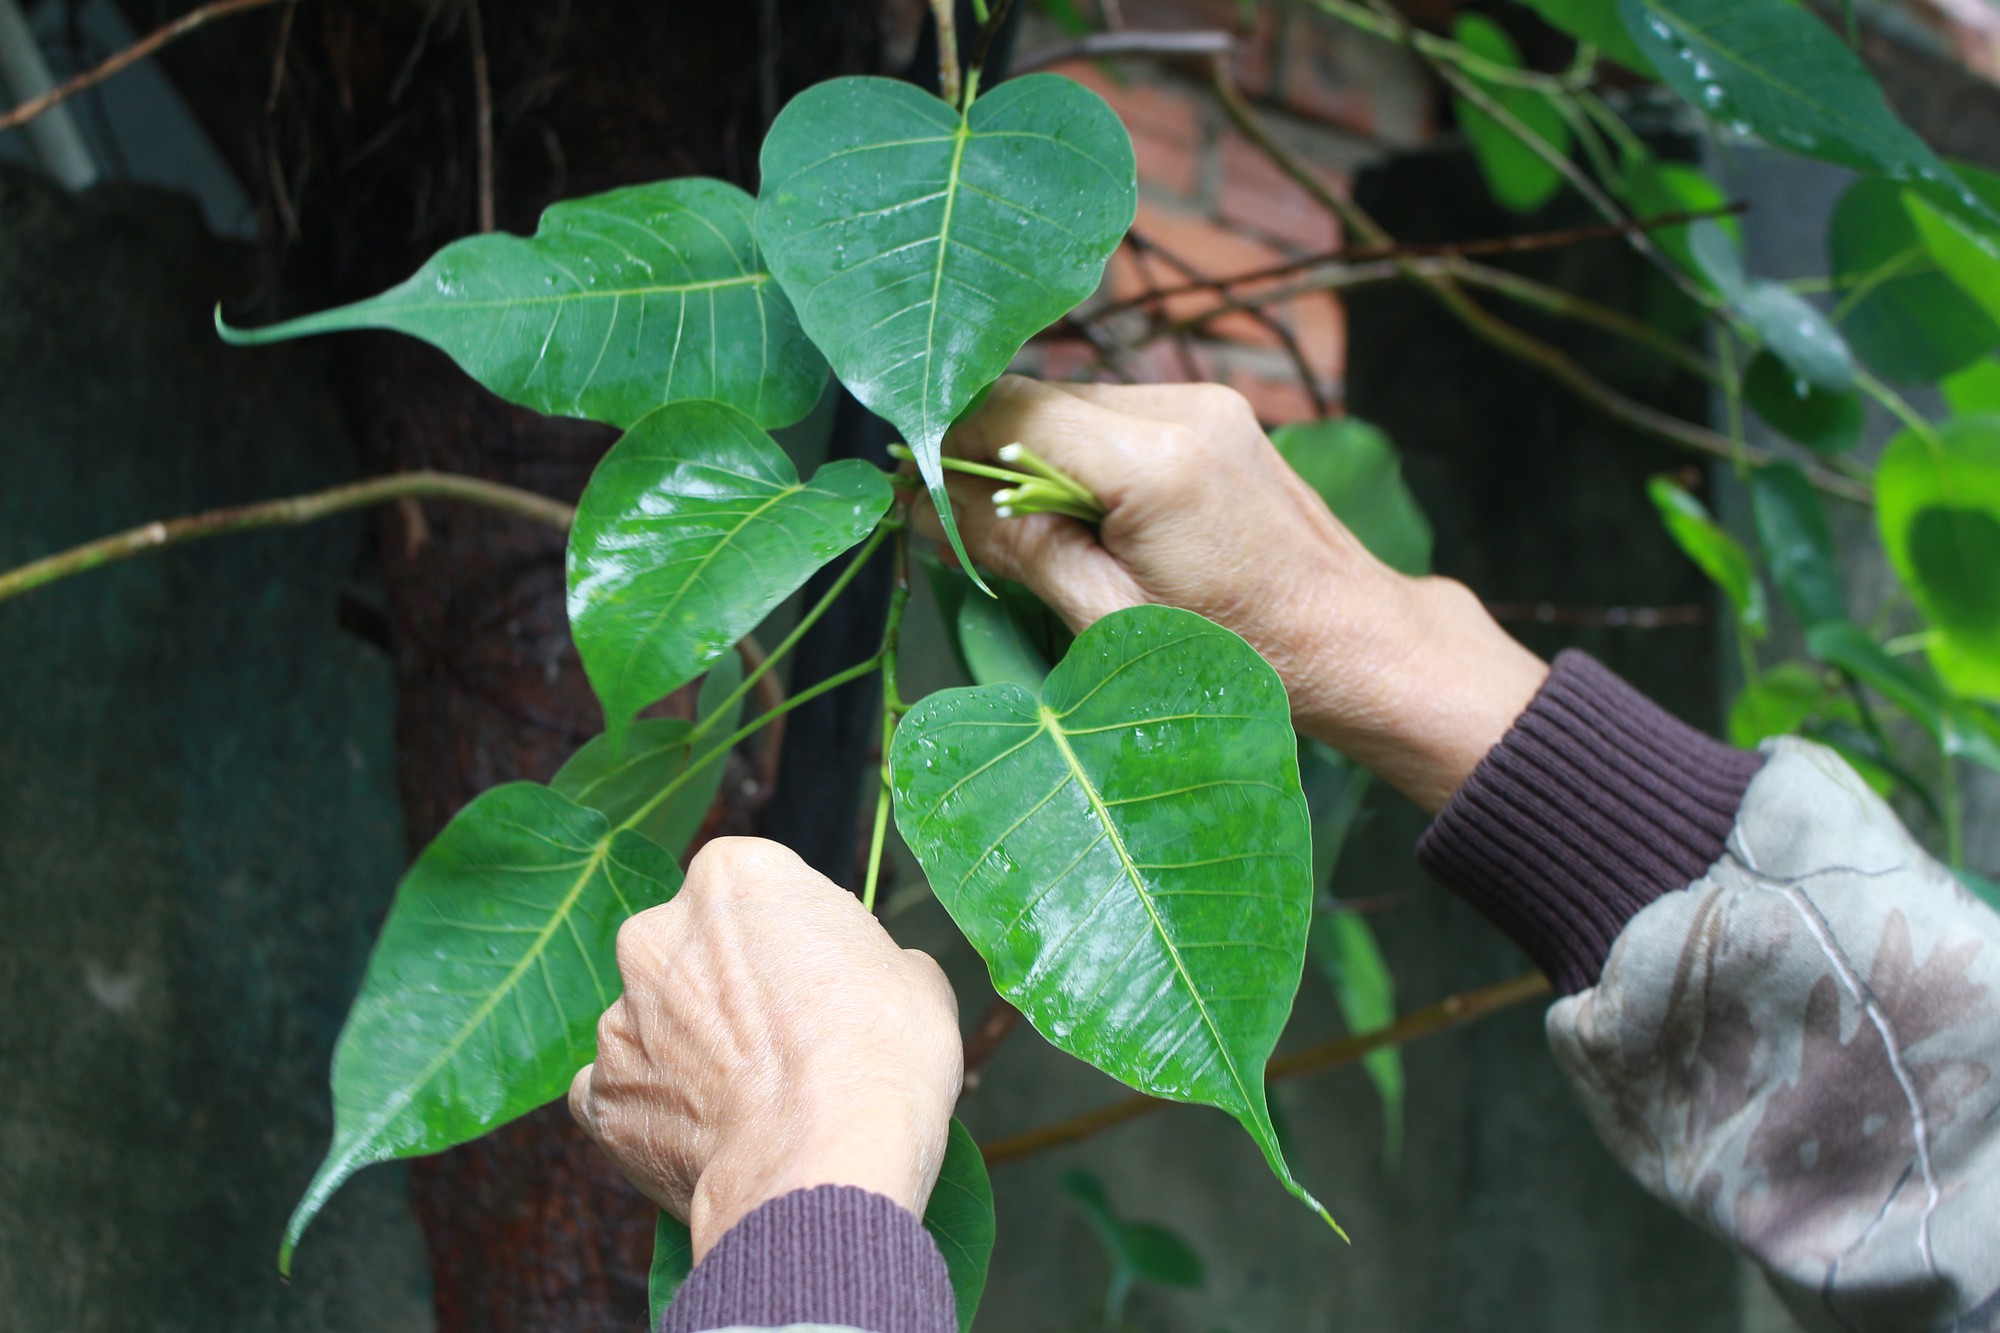 Le Nguyen Vy collects Bodhi leaves. Photo: Doan Nhan / Tuoi Tre